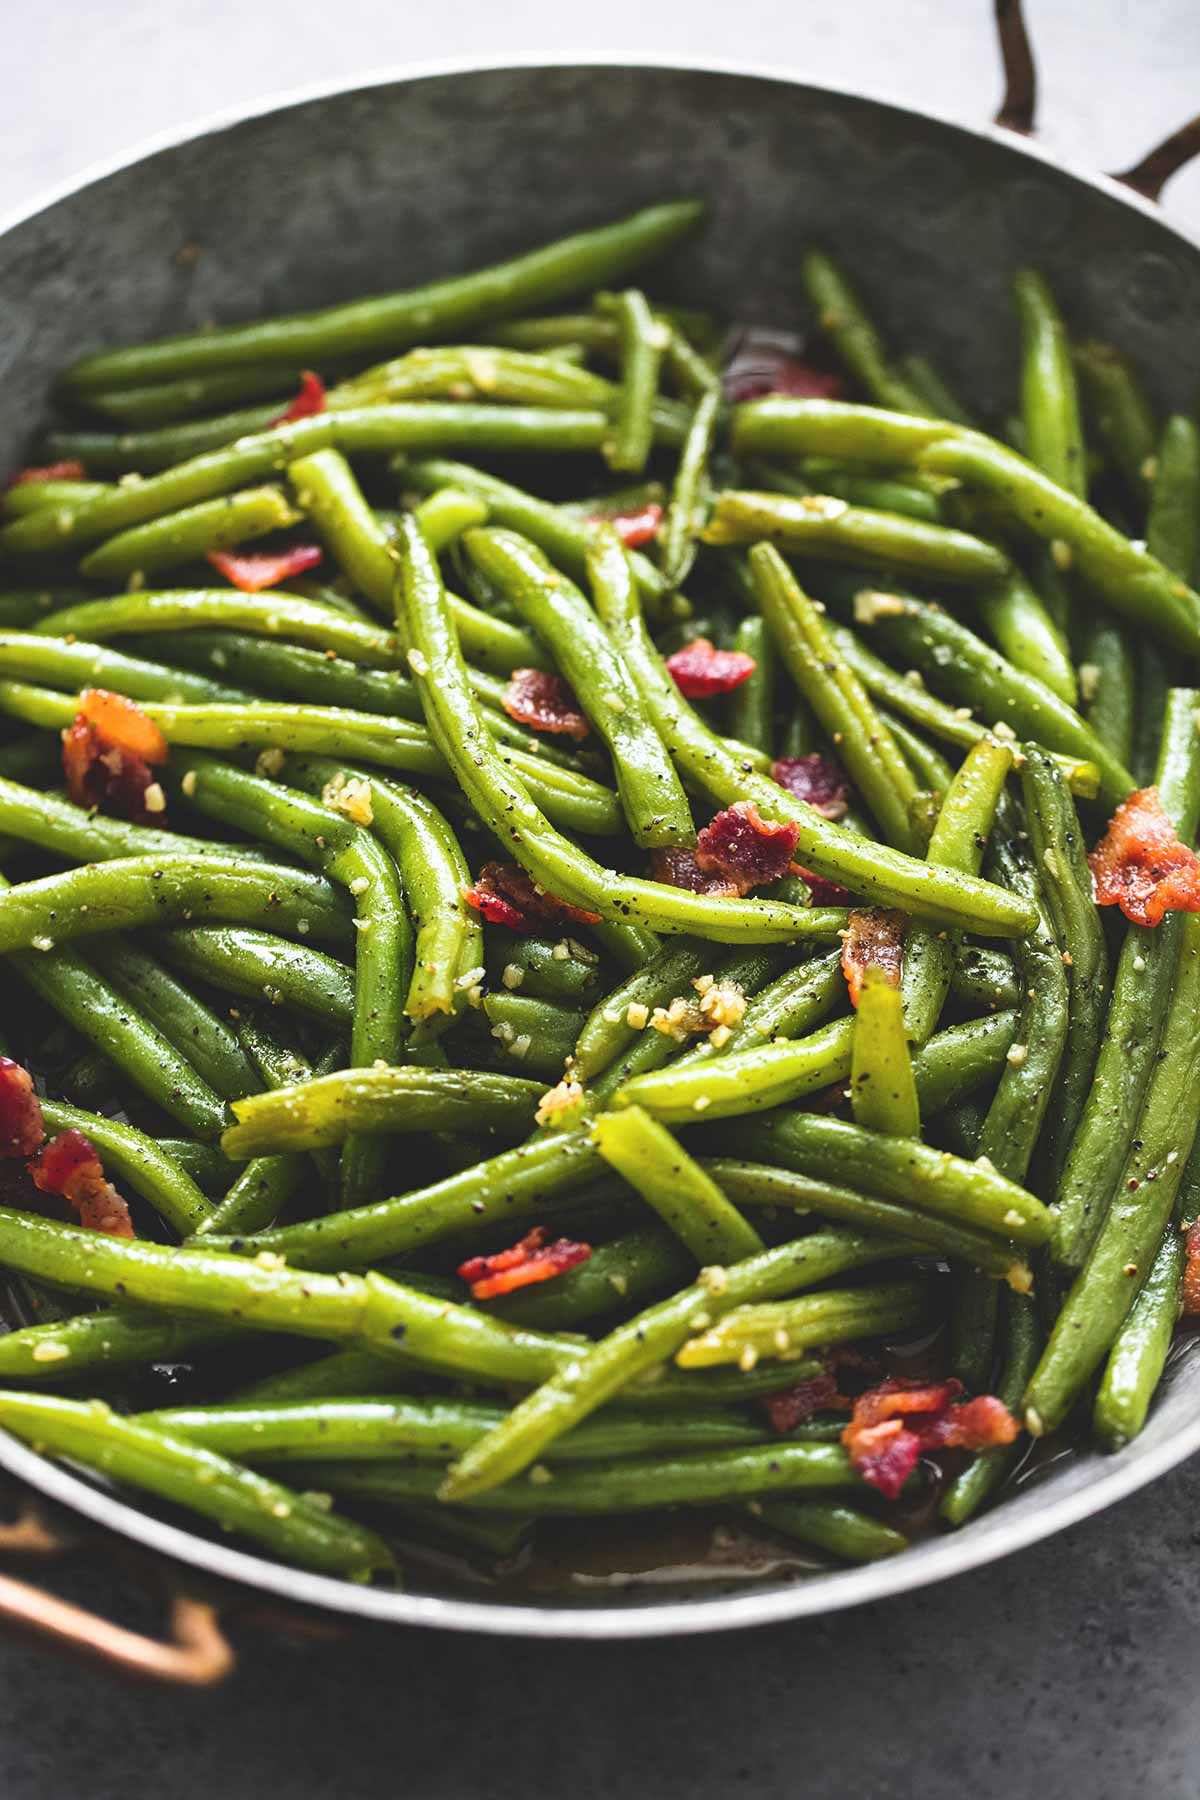 Best Green Bean Recipe For Thanksgiving
 21 Last Minute Thanksgiving Appetizers to Serve